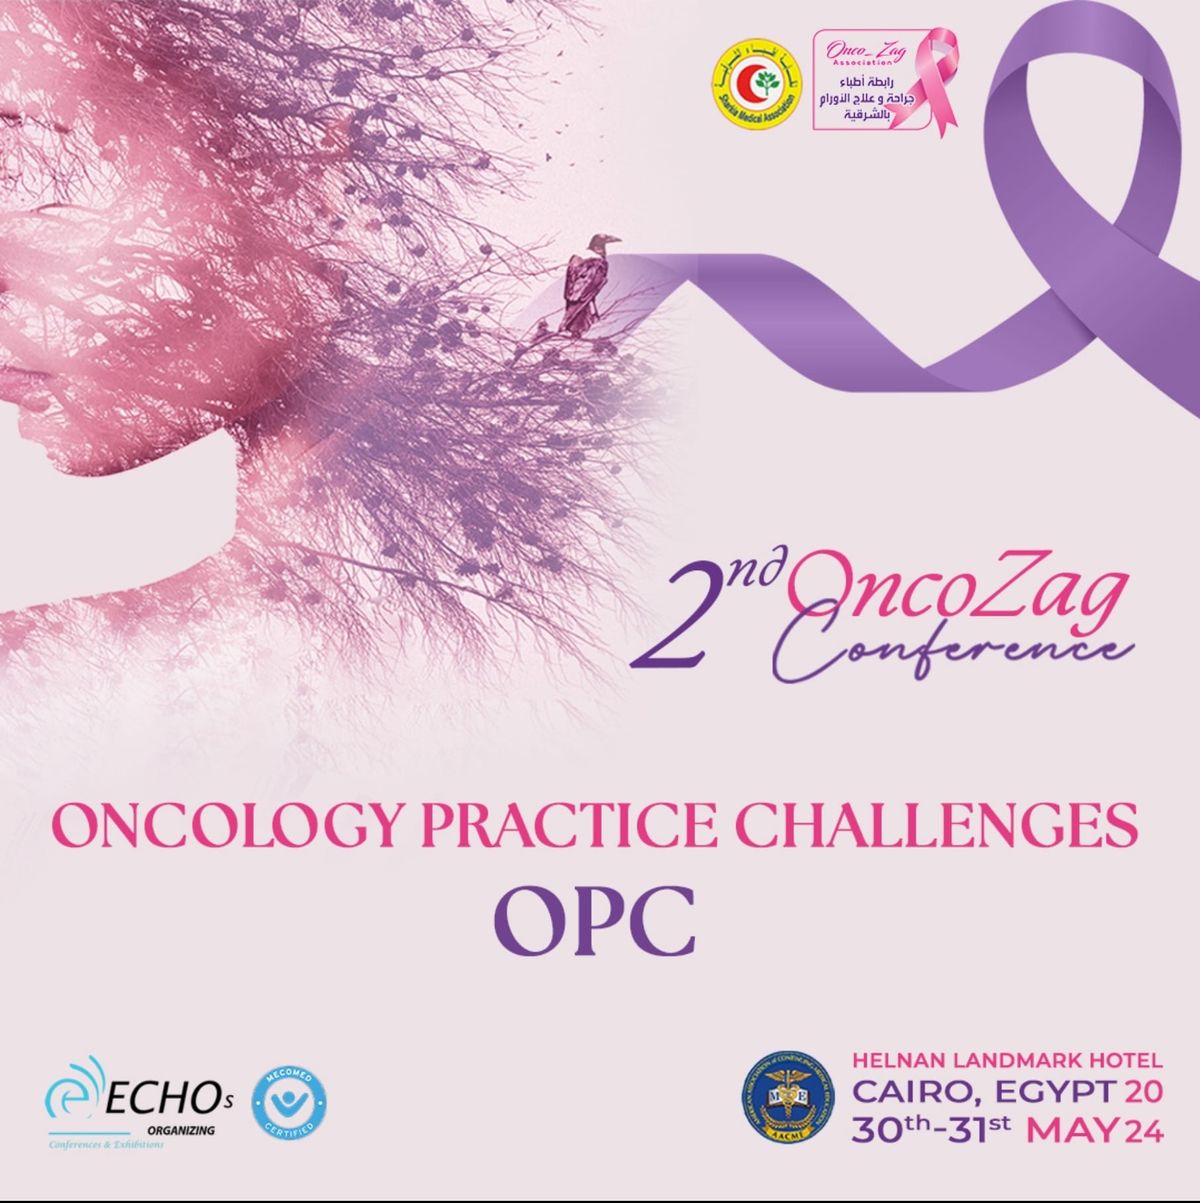 2ND ONCO ZAG CONFERENCE